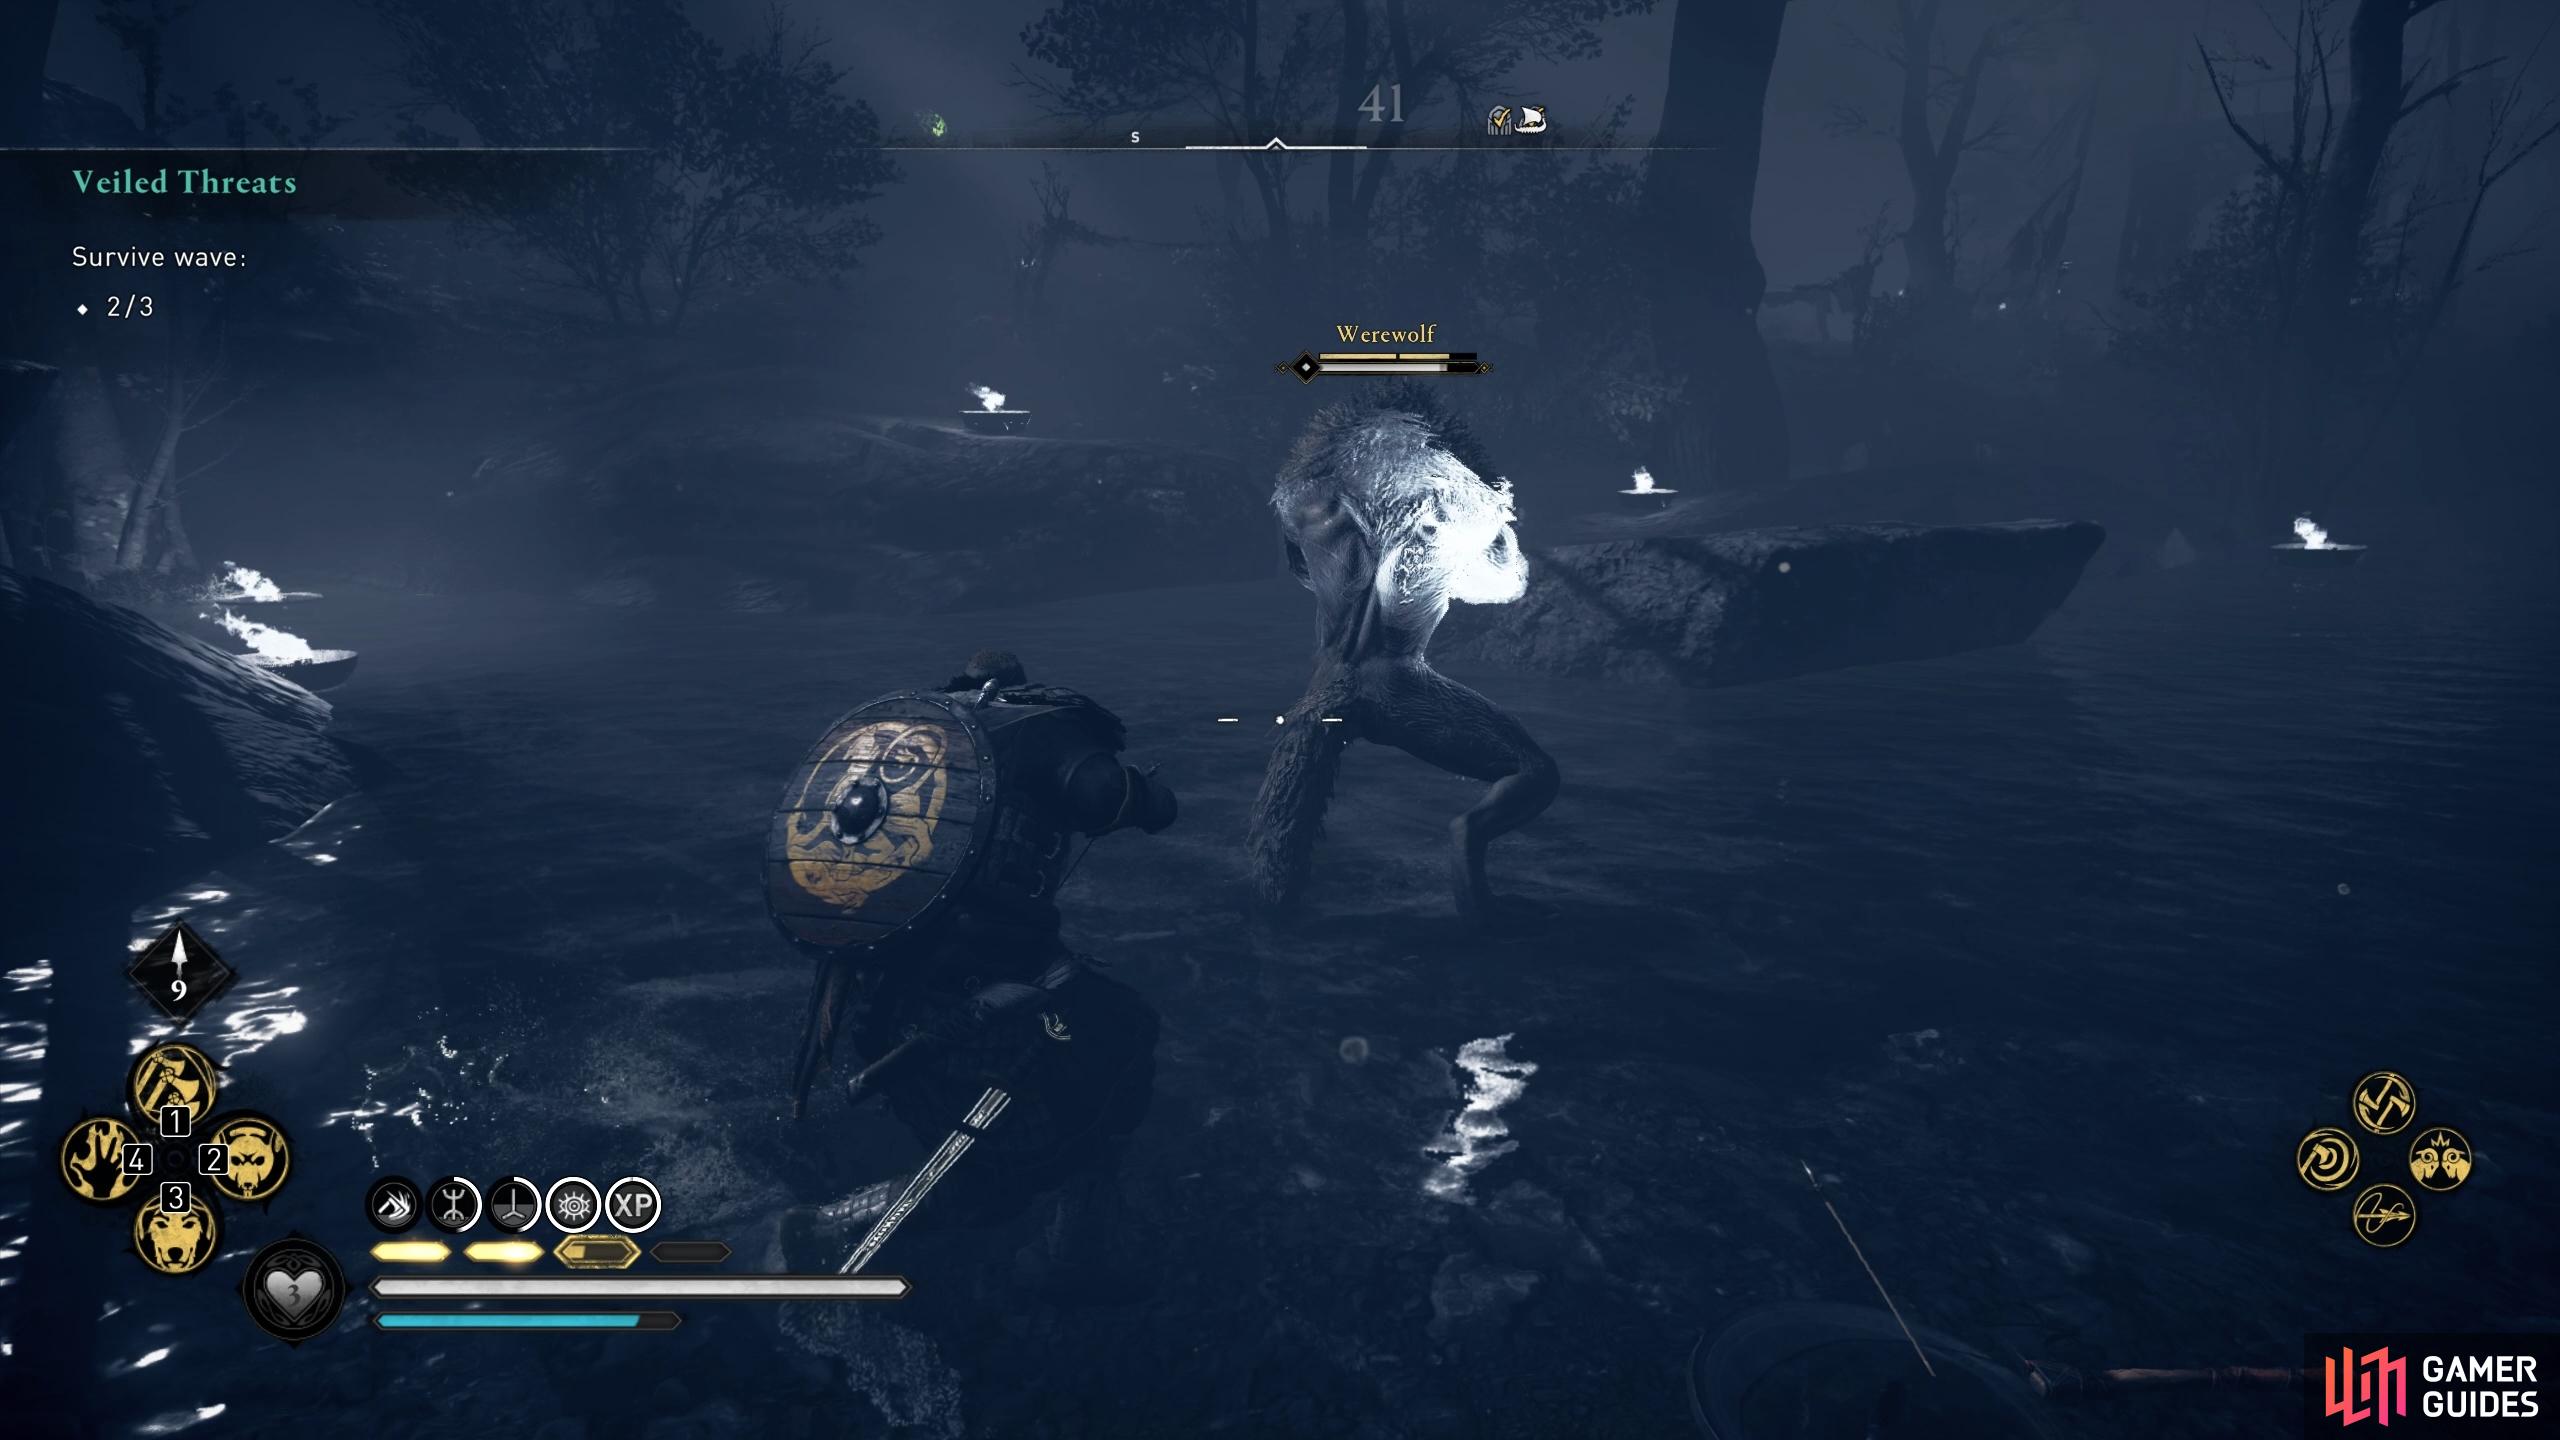 Avoid the Werewolf special attacks at all costs, which are the most damaging by far.